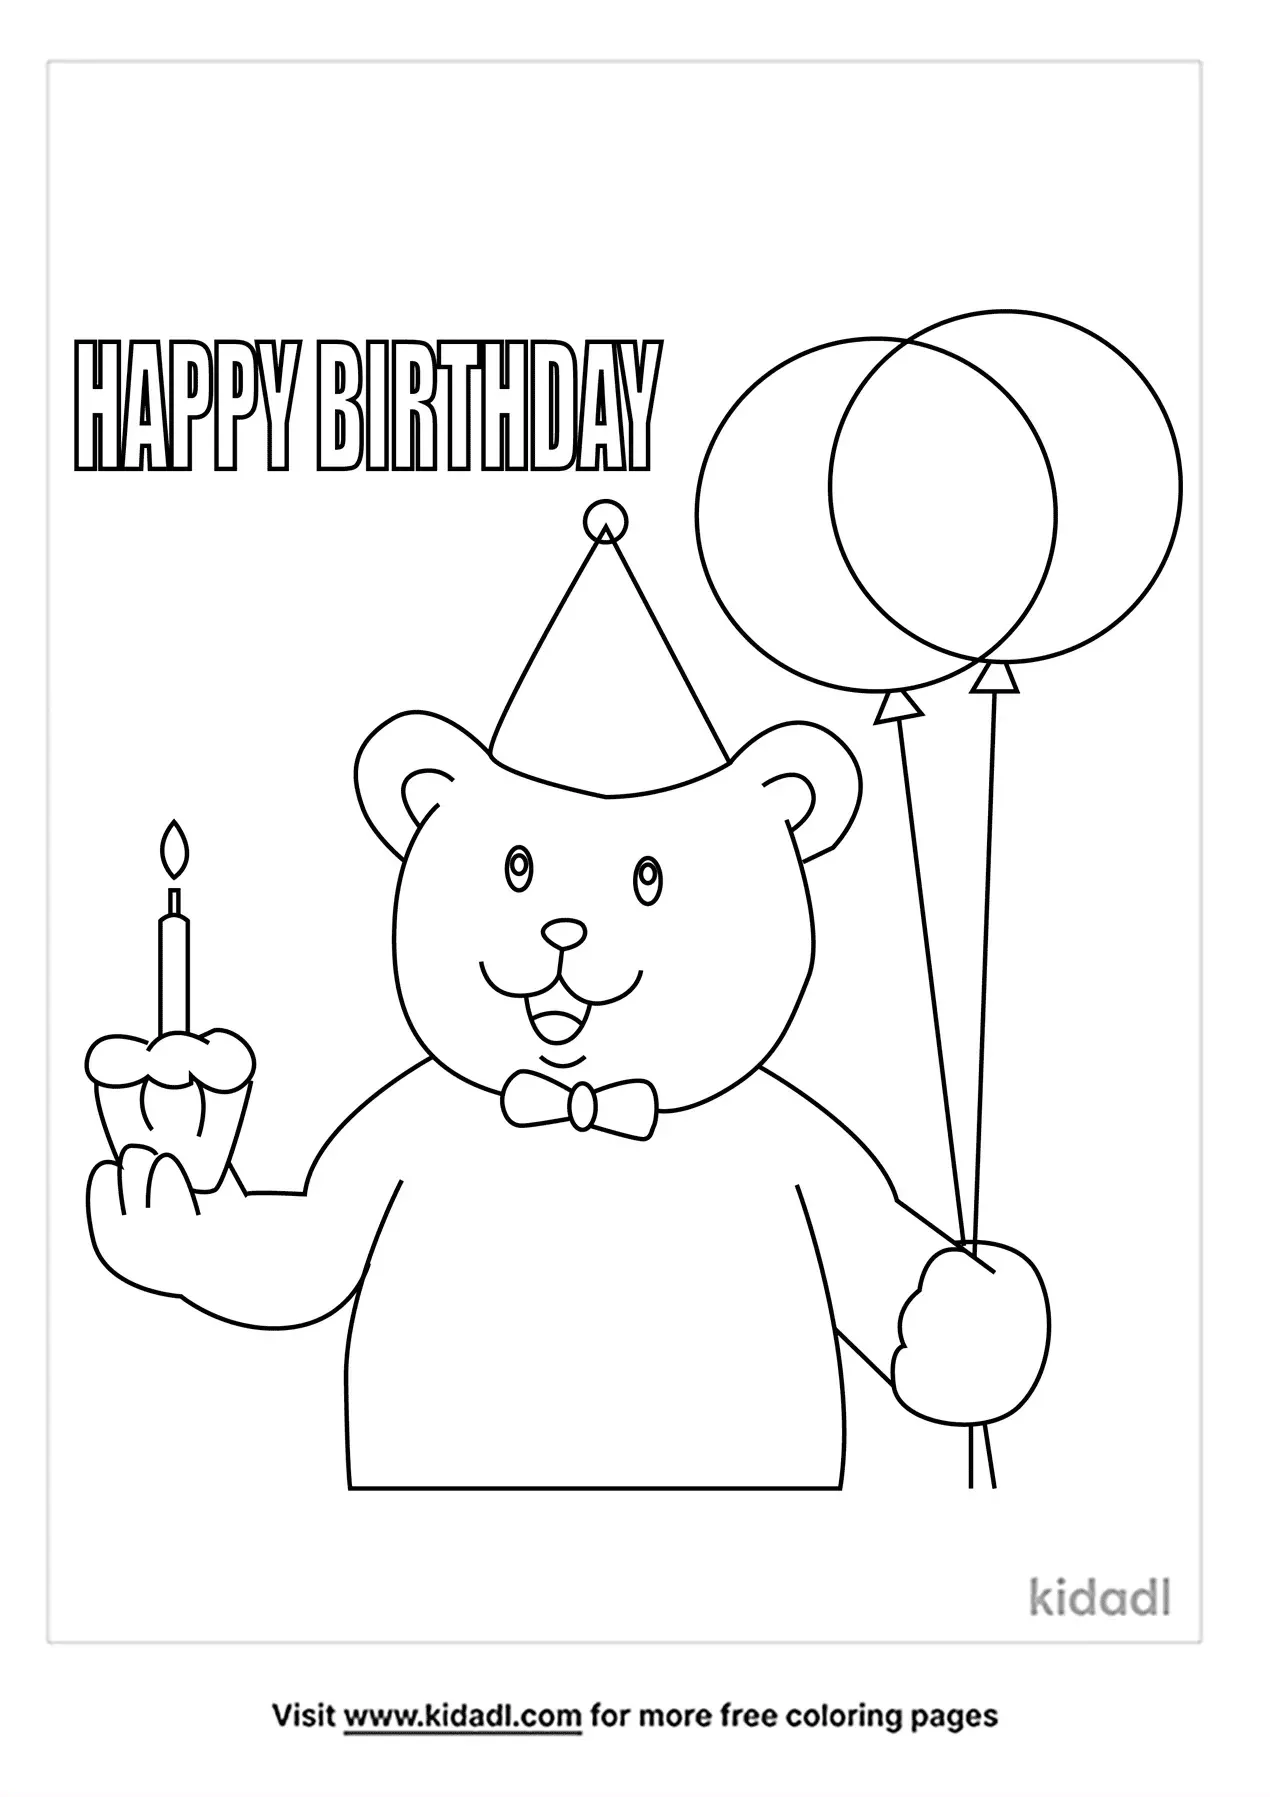 Free Happy Birthday Bear Coloring Page | Coloring Page Printables | Kidadl